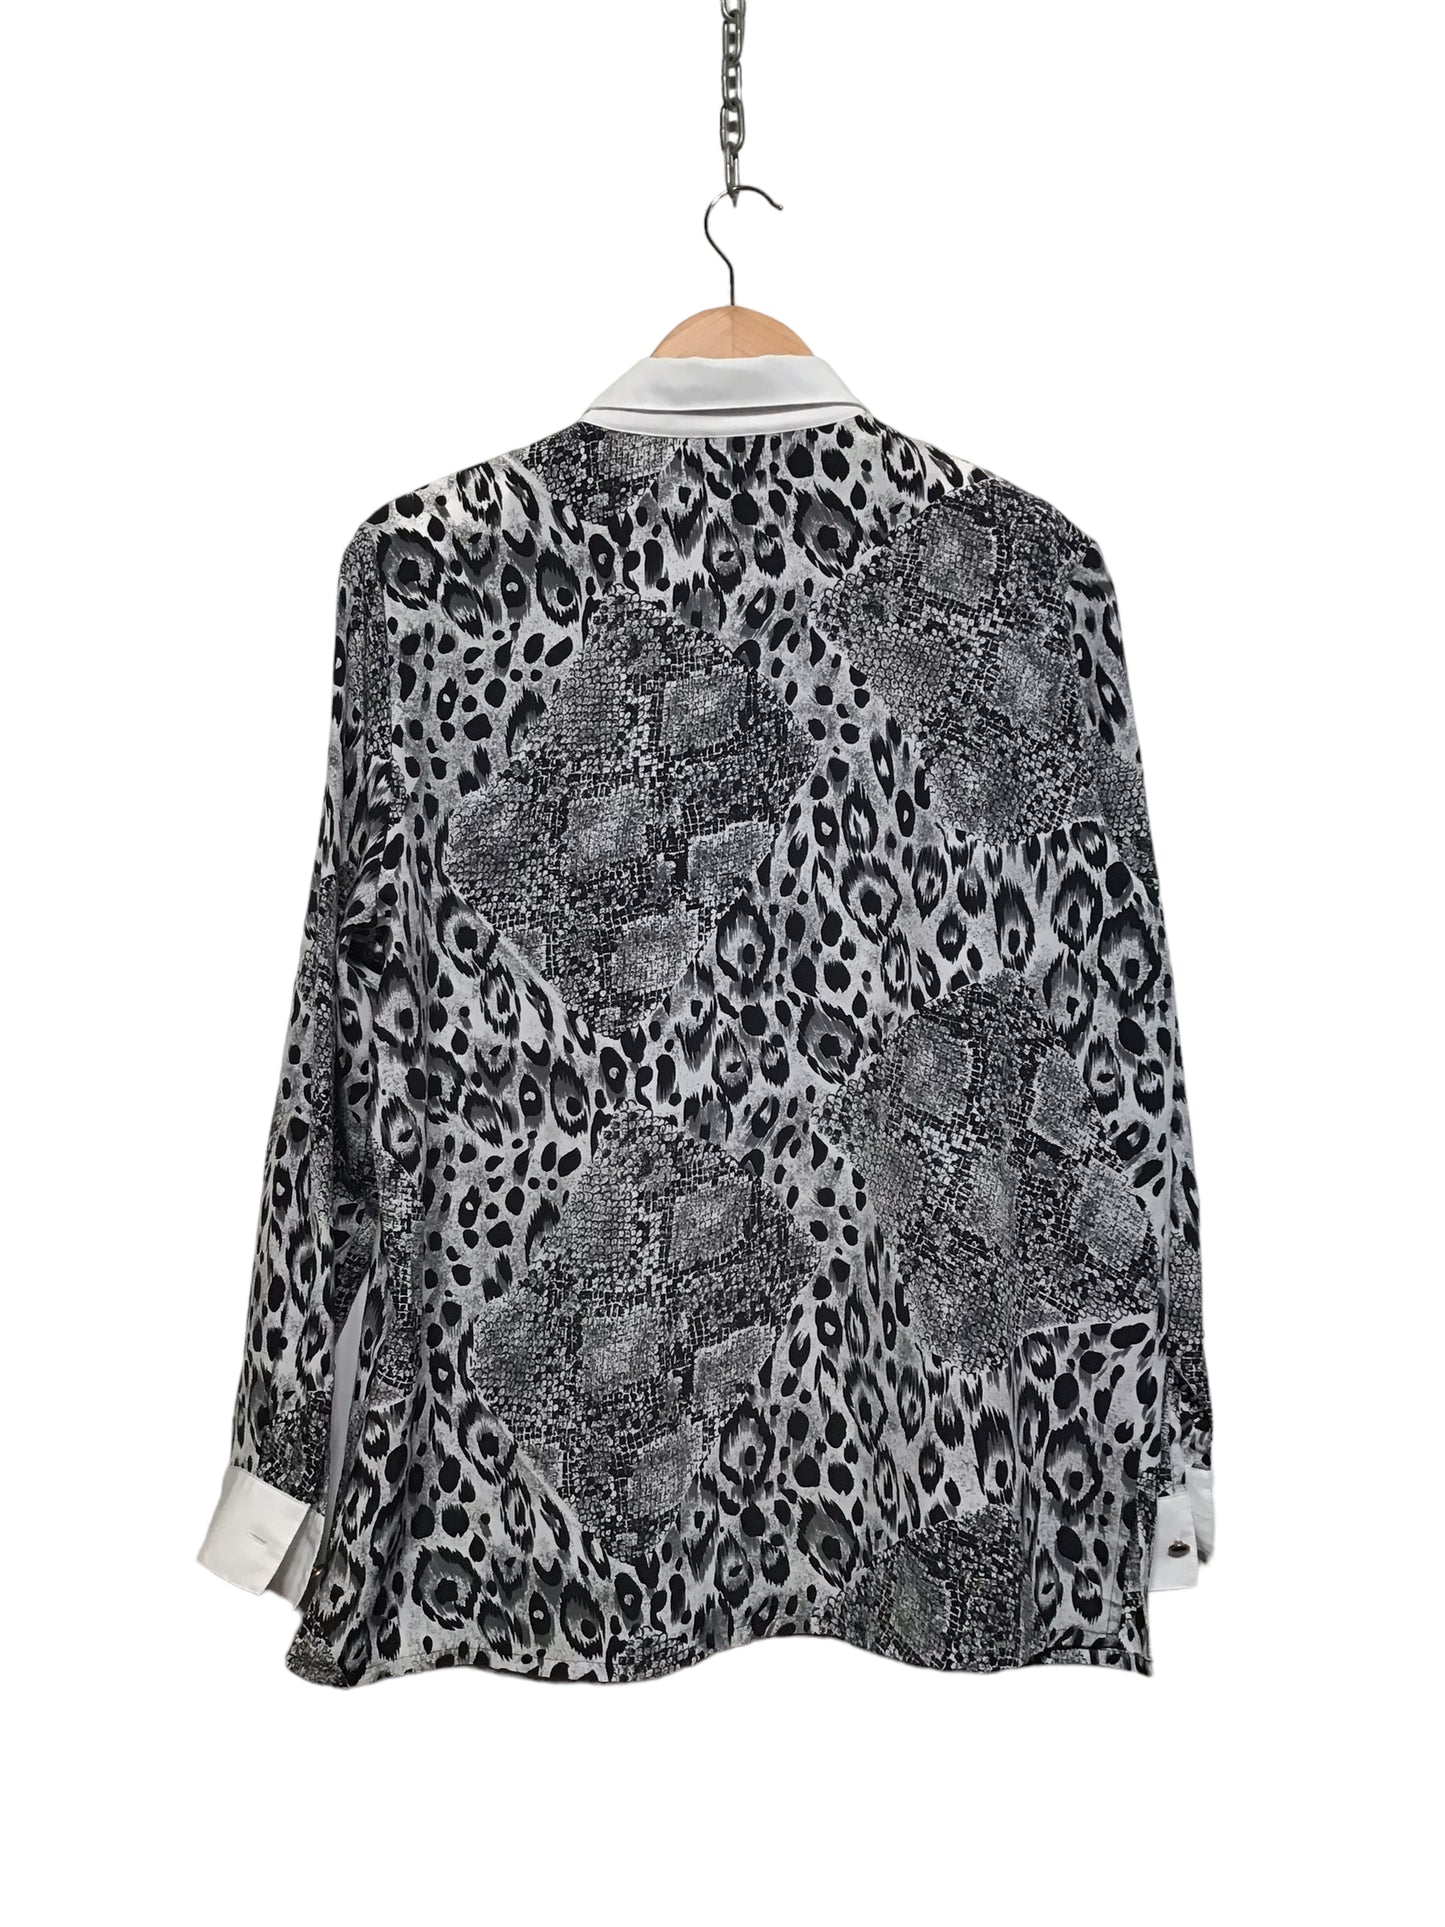 Black and White Printed Blouse (Size L)